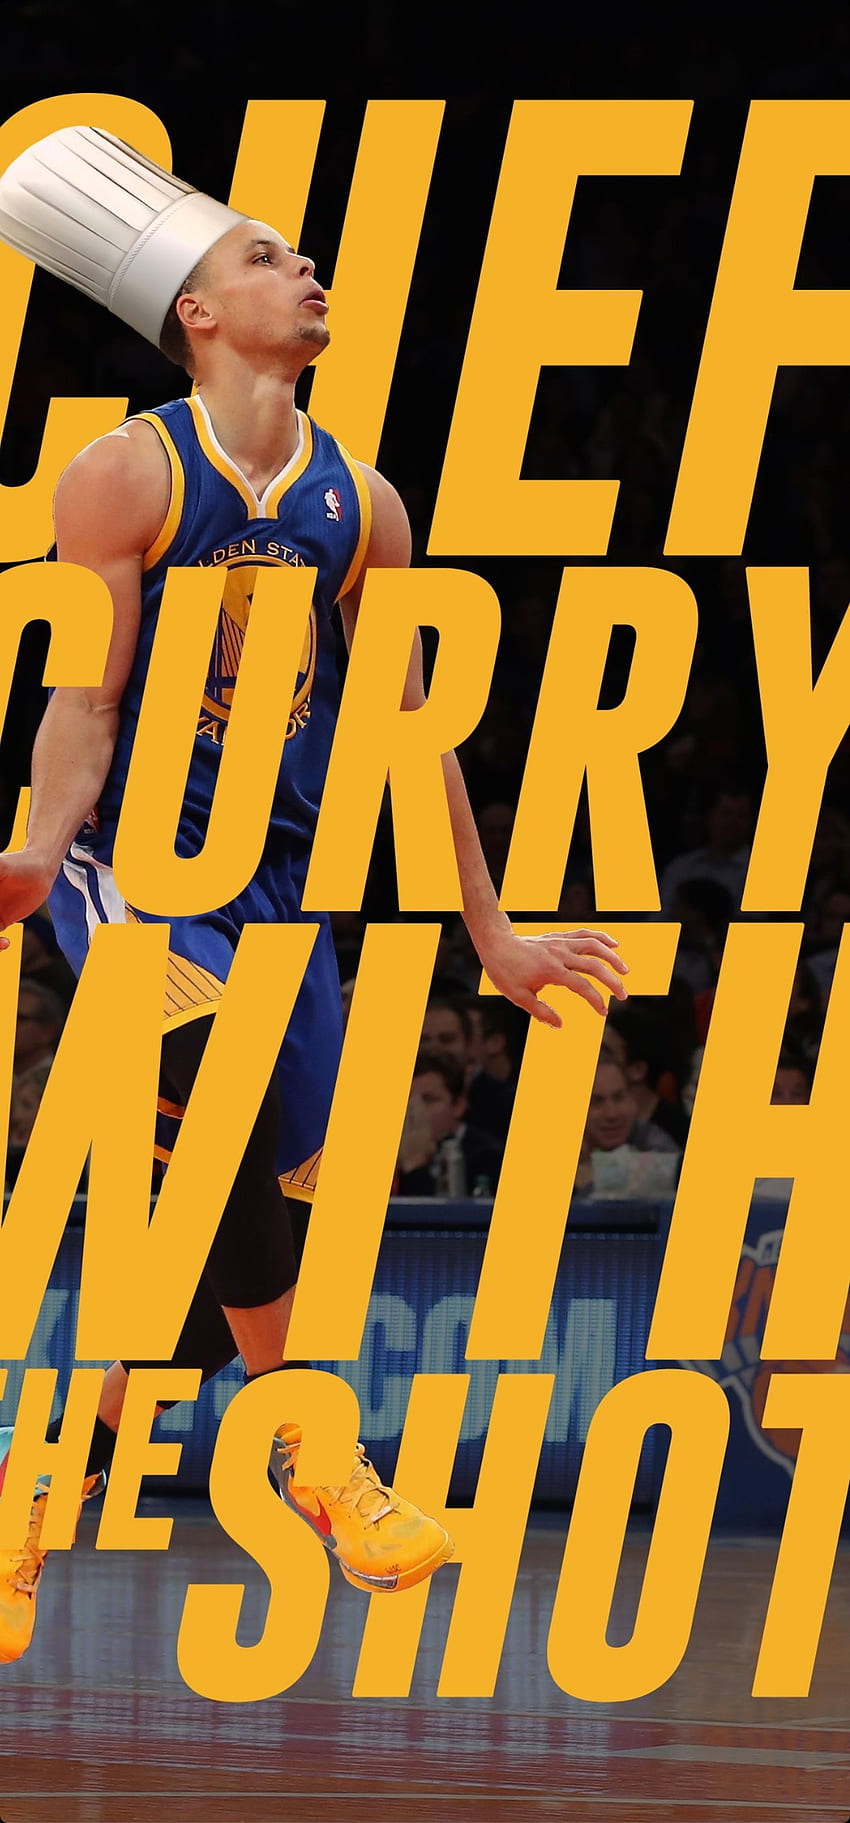 Chef Curry, sports, Stephen Curry, California, Basketball, NBA, San Francisco, Hall of Fame, Bay Area, Yellow, Steph, 30, champion HD phone wallpaper